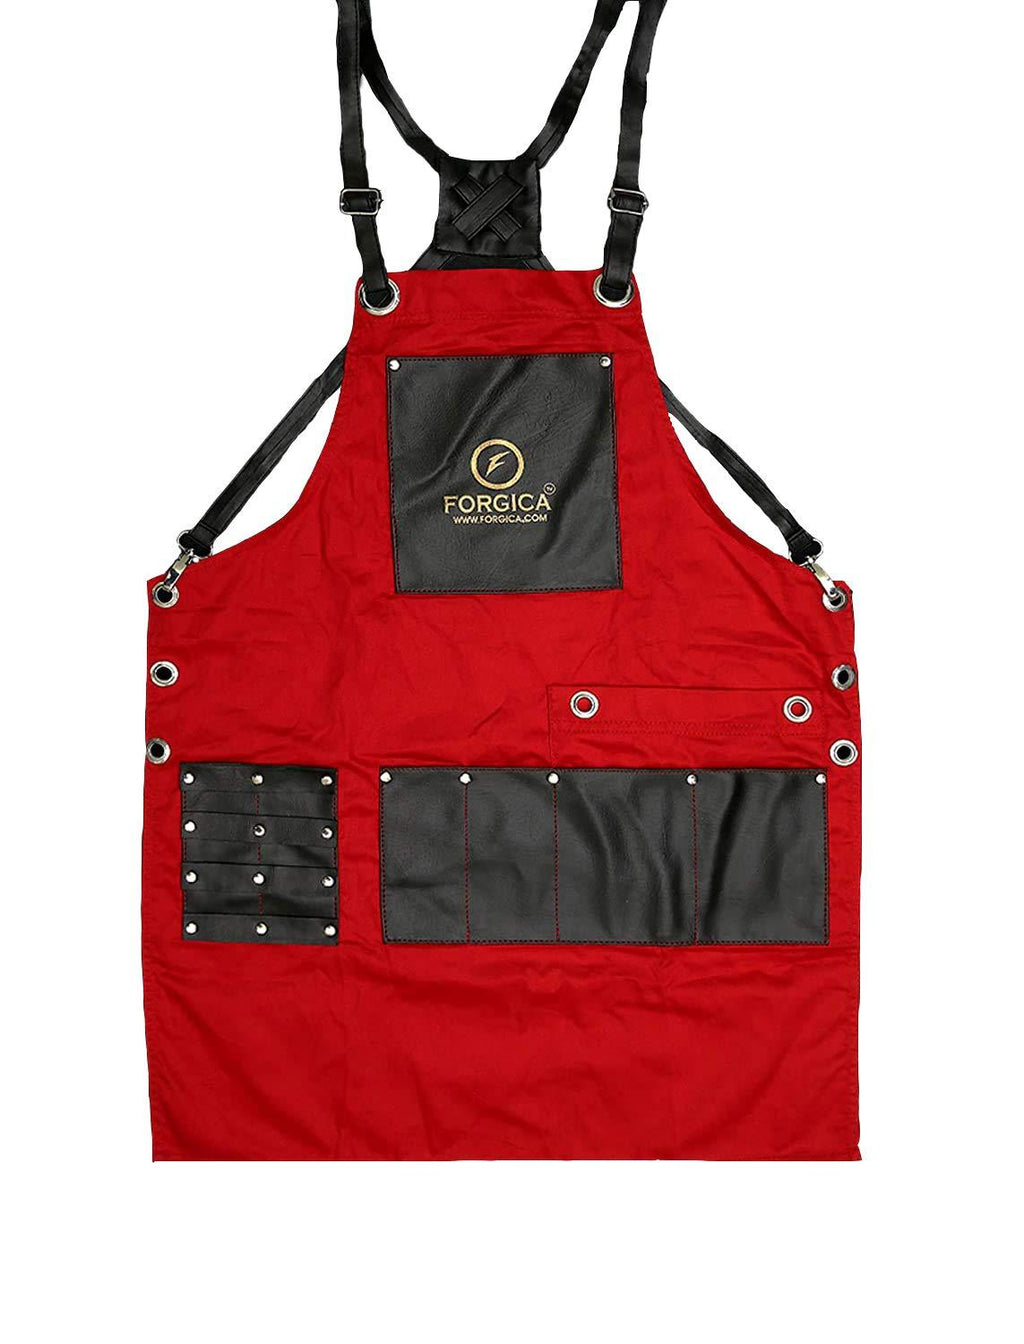 [Australia] - FORGICA Professional Leather Aprons for Men Barber Apron Cape for Salon Hairstylist Multi use, Adjustable with 8 pockets - Heavy Duty Work Apron Premium Quality Aprons For Women- NY Edition (Red And Black) Red And Black 